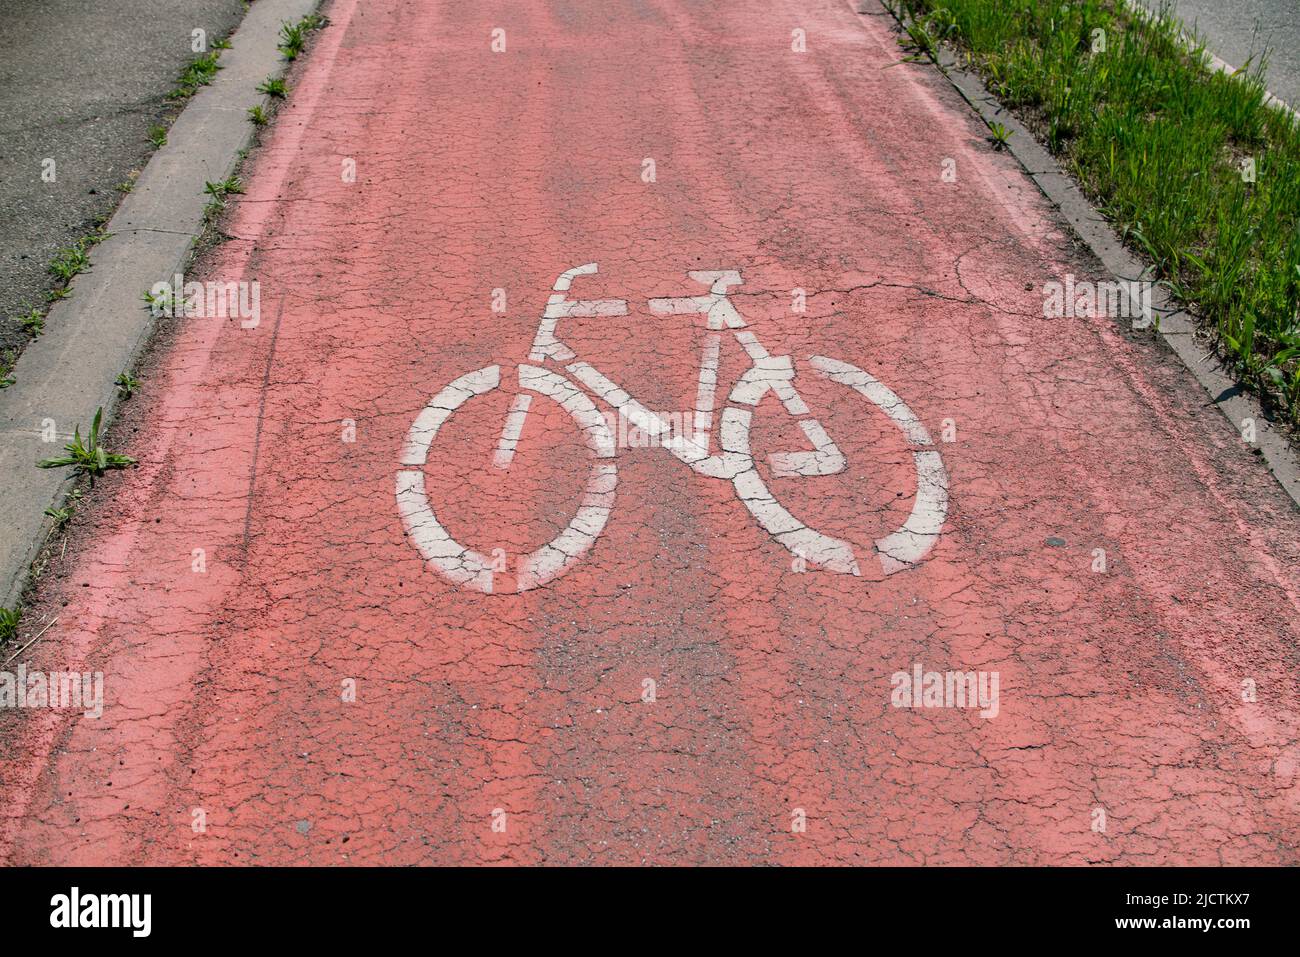 cycle path, road symbol of the bicycle, with red asphalt to highlight the passage dedicated to bicycles. Stock Photo